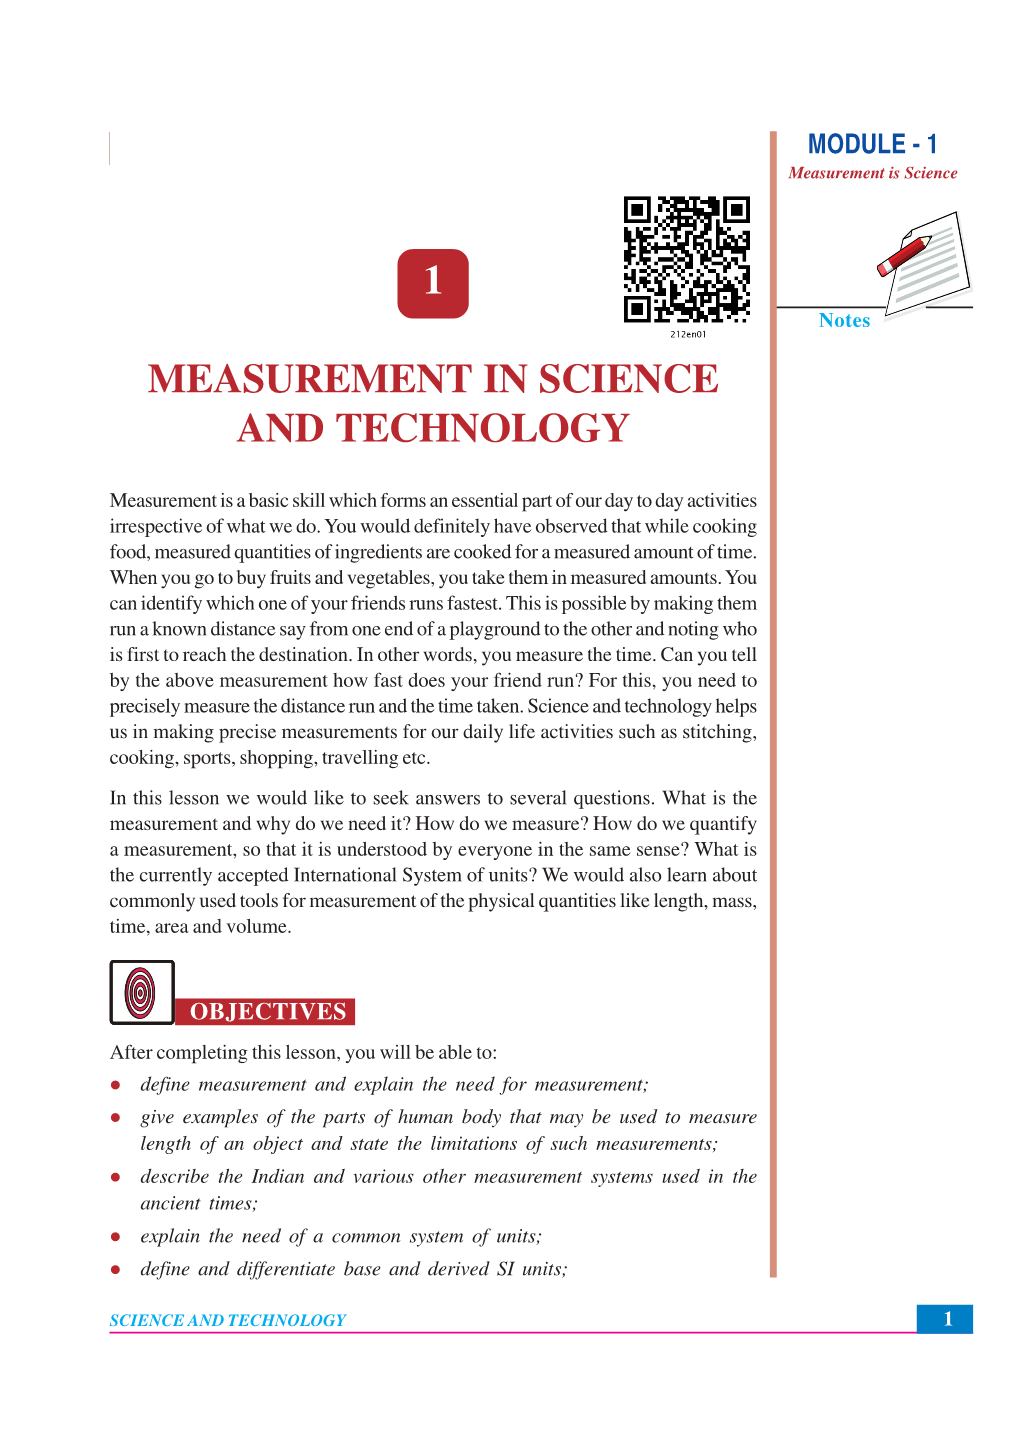 1 Measurement in Science and Technology